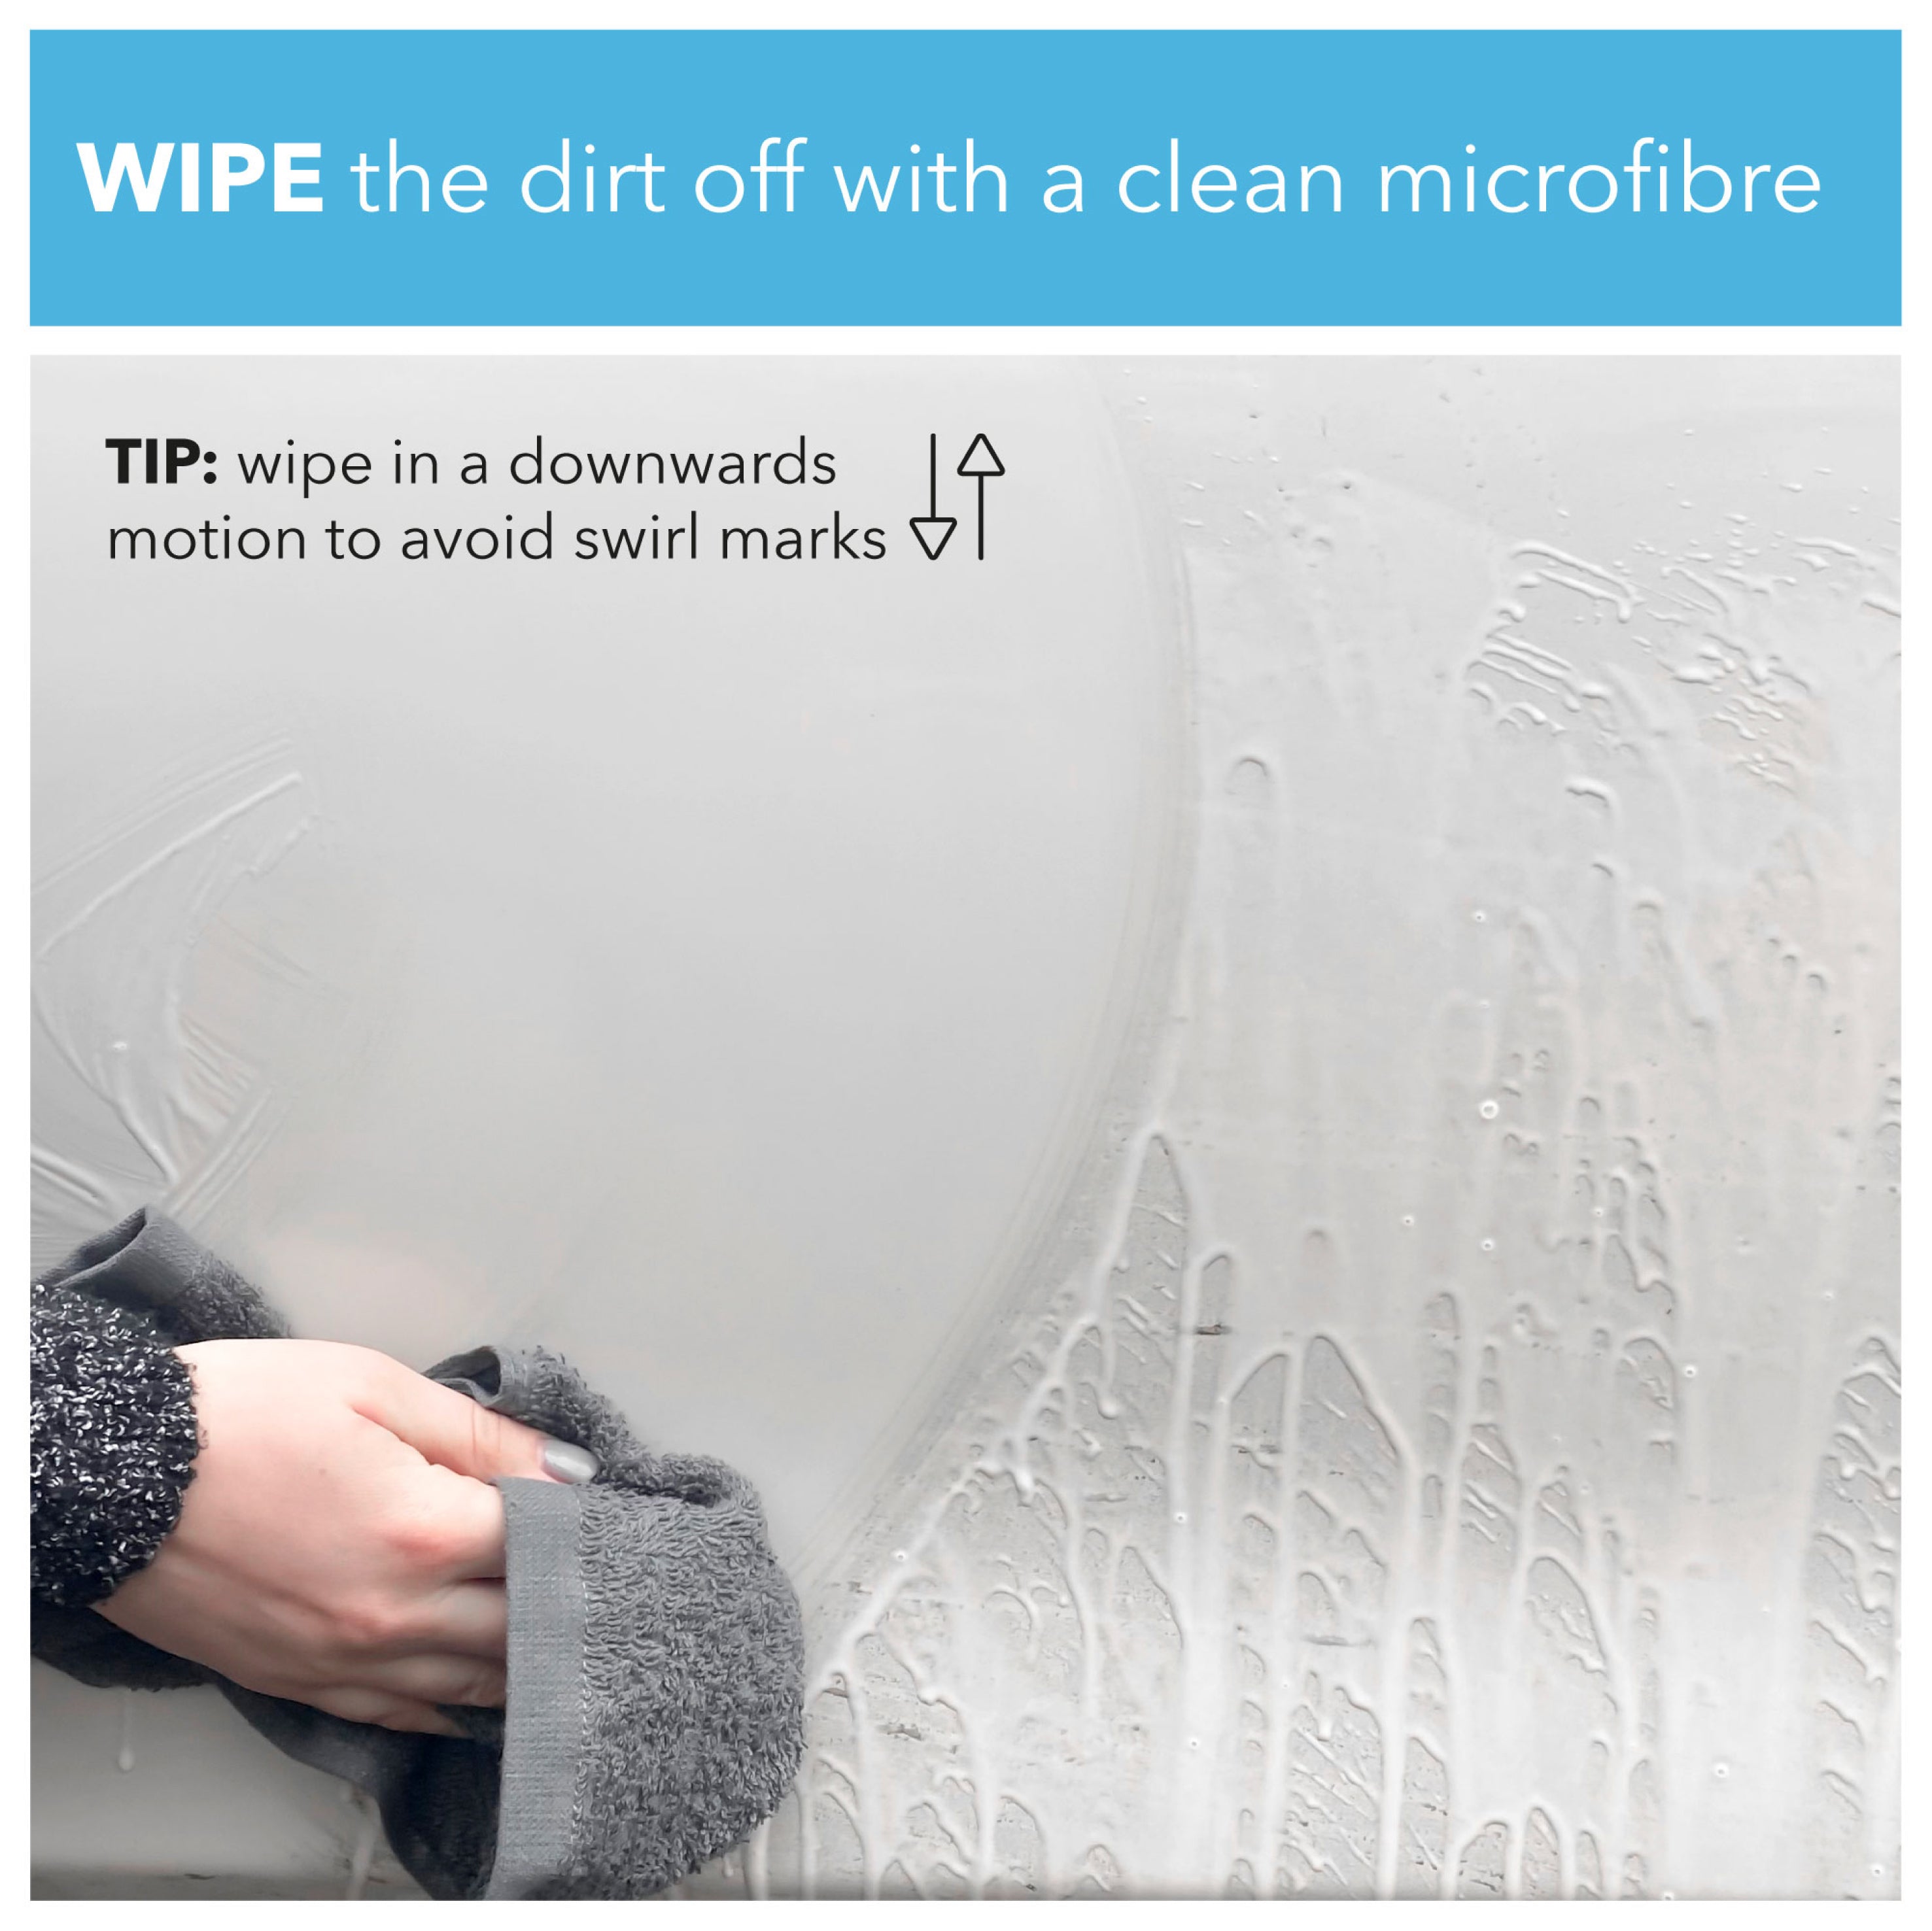 wipe the dirt off with a clean microfibre